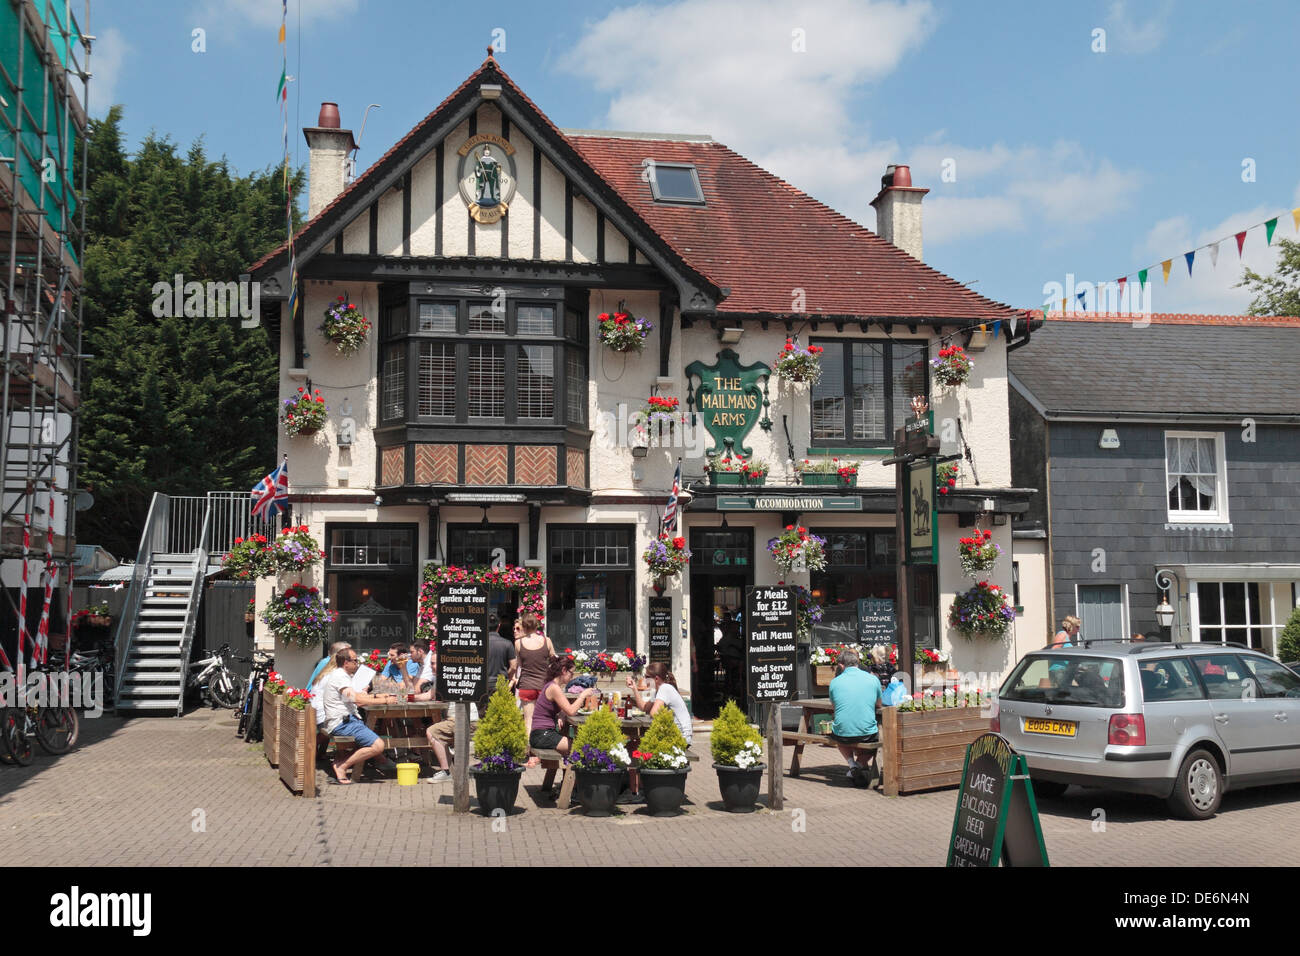 Das Mailmans Arms Public House in Lyndhurst, New Forest, Hampshire, UK. Stockfoto